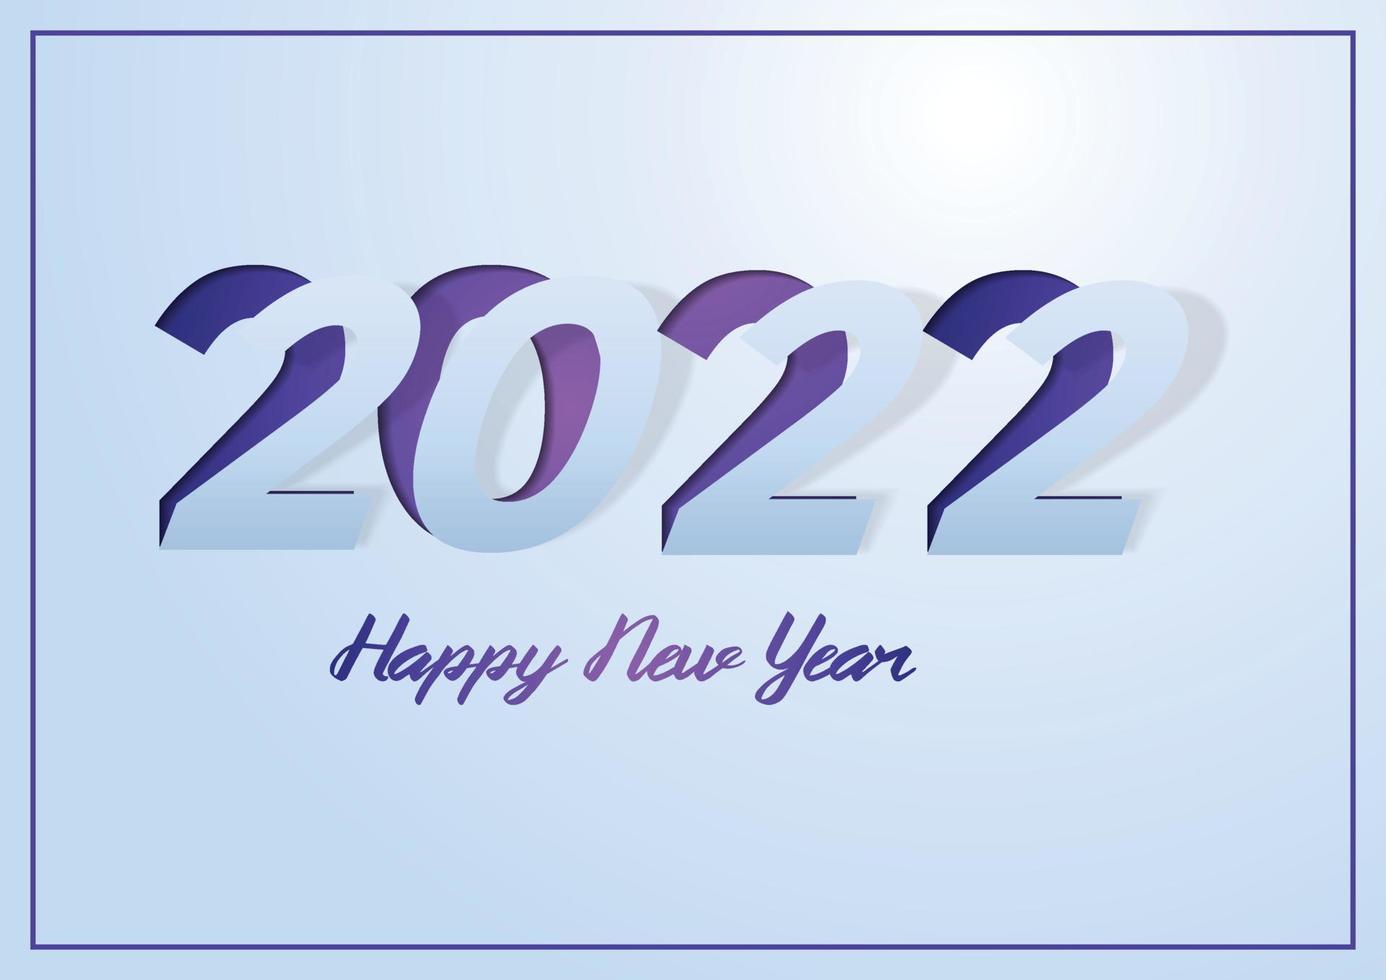 Happy New Year 2022 greeting card illustration. Blue calendar number sign and festive text quote with paper cut effect. vector